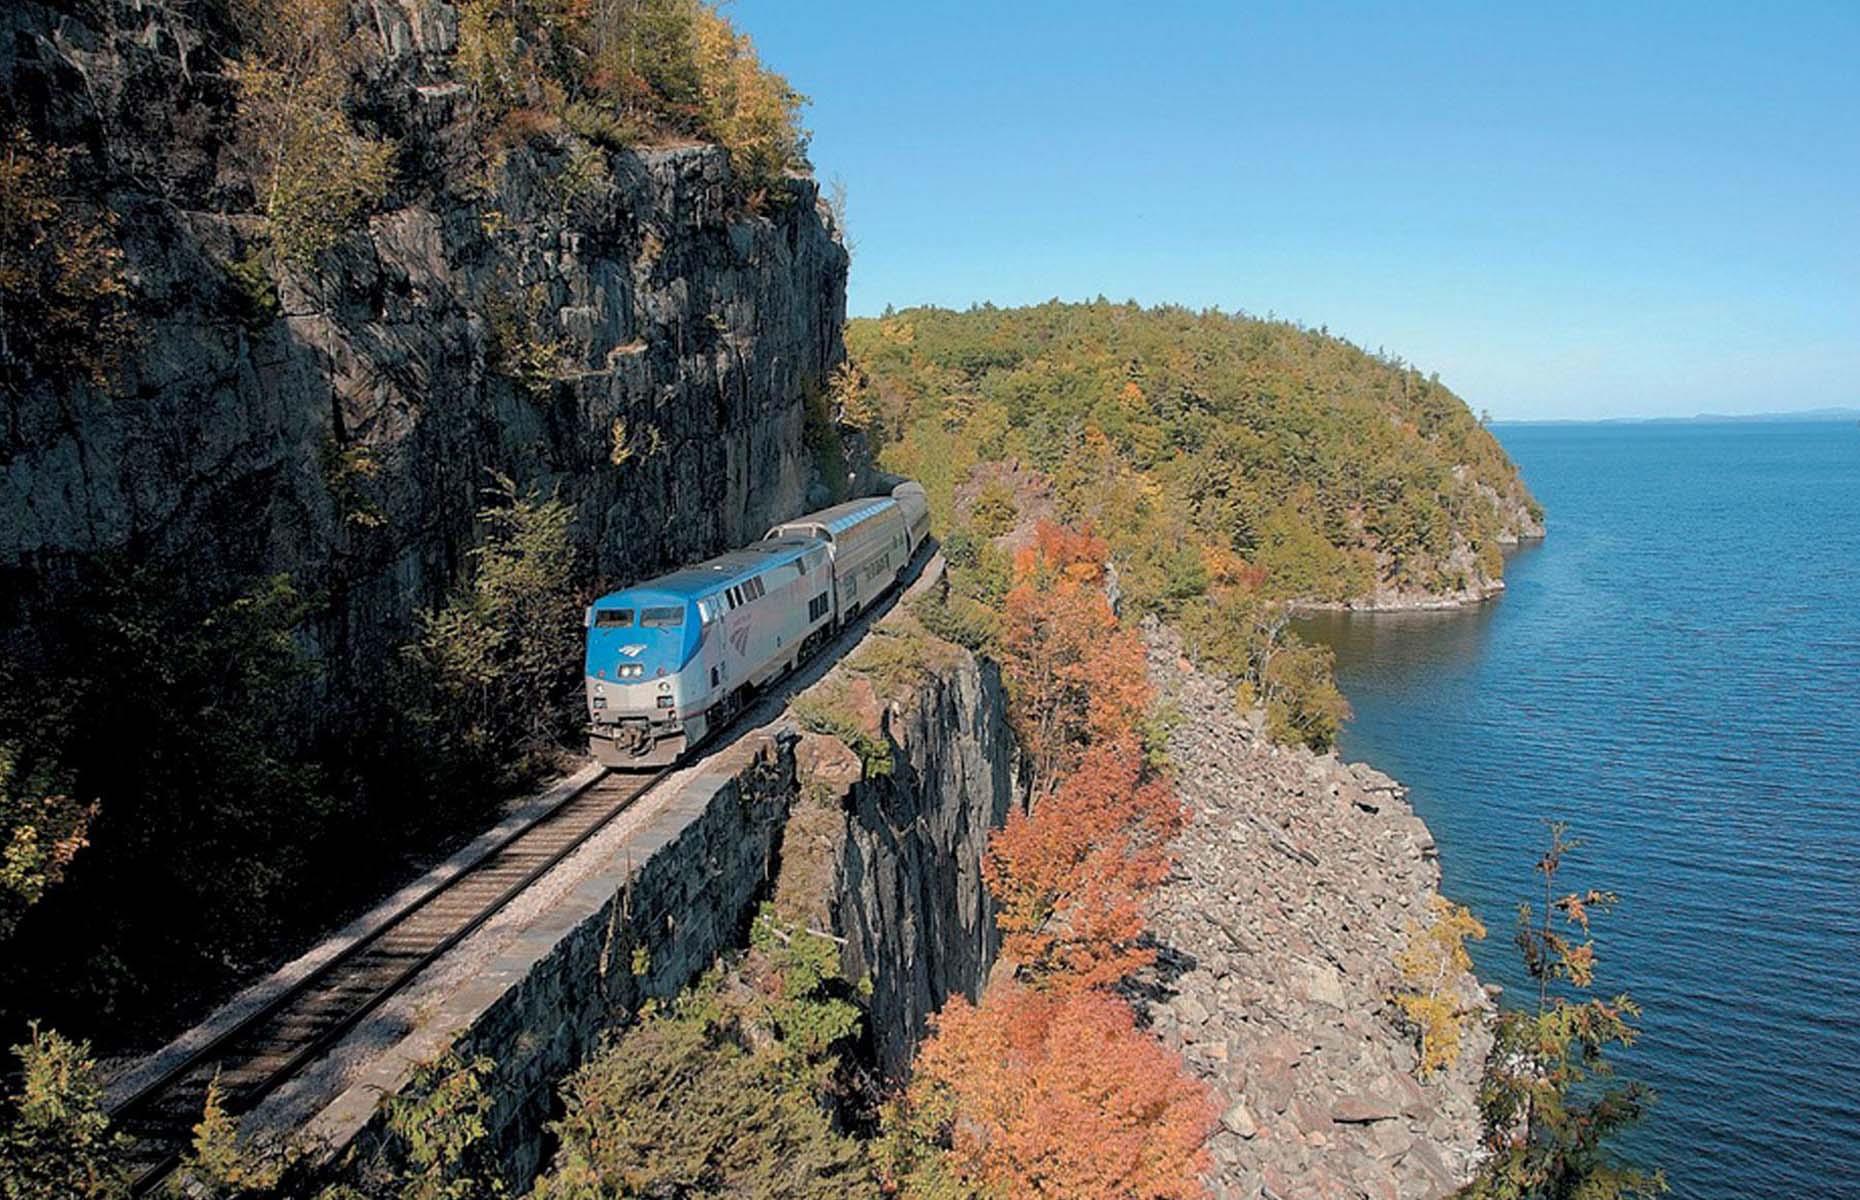 Passengers can cross the border with Canada in style straight from New York City on Amtrak’s Adirondack, which weaves its leisurely way through the Hudson River Valley. It passes lush farmlands north of Albany on a 10-hour journey into Montréal via Poughkeepsie, Hudson and Saratoga Springs.